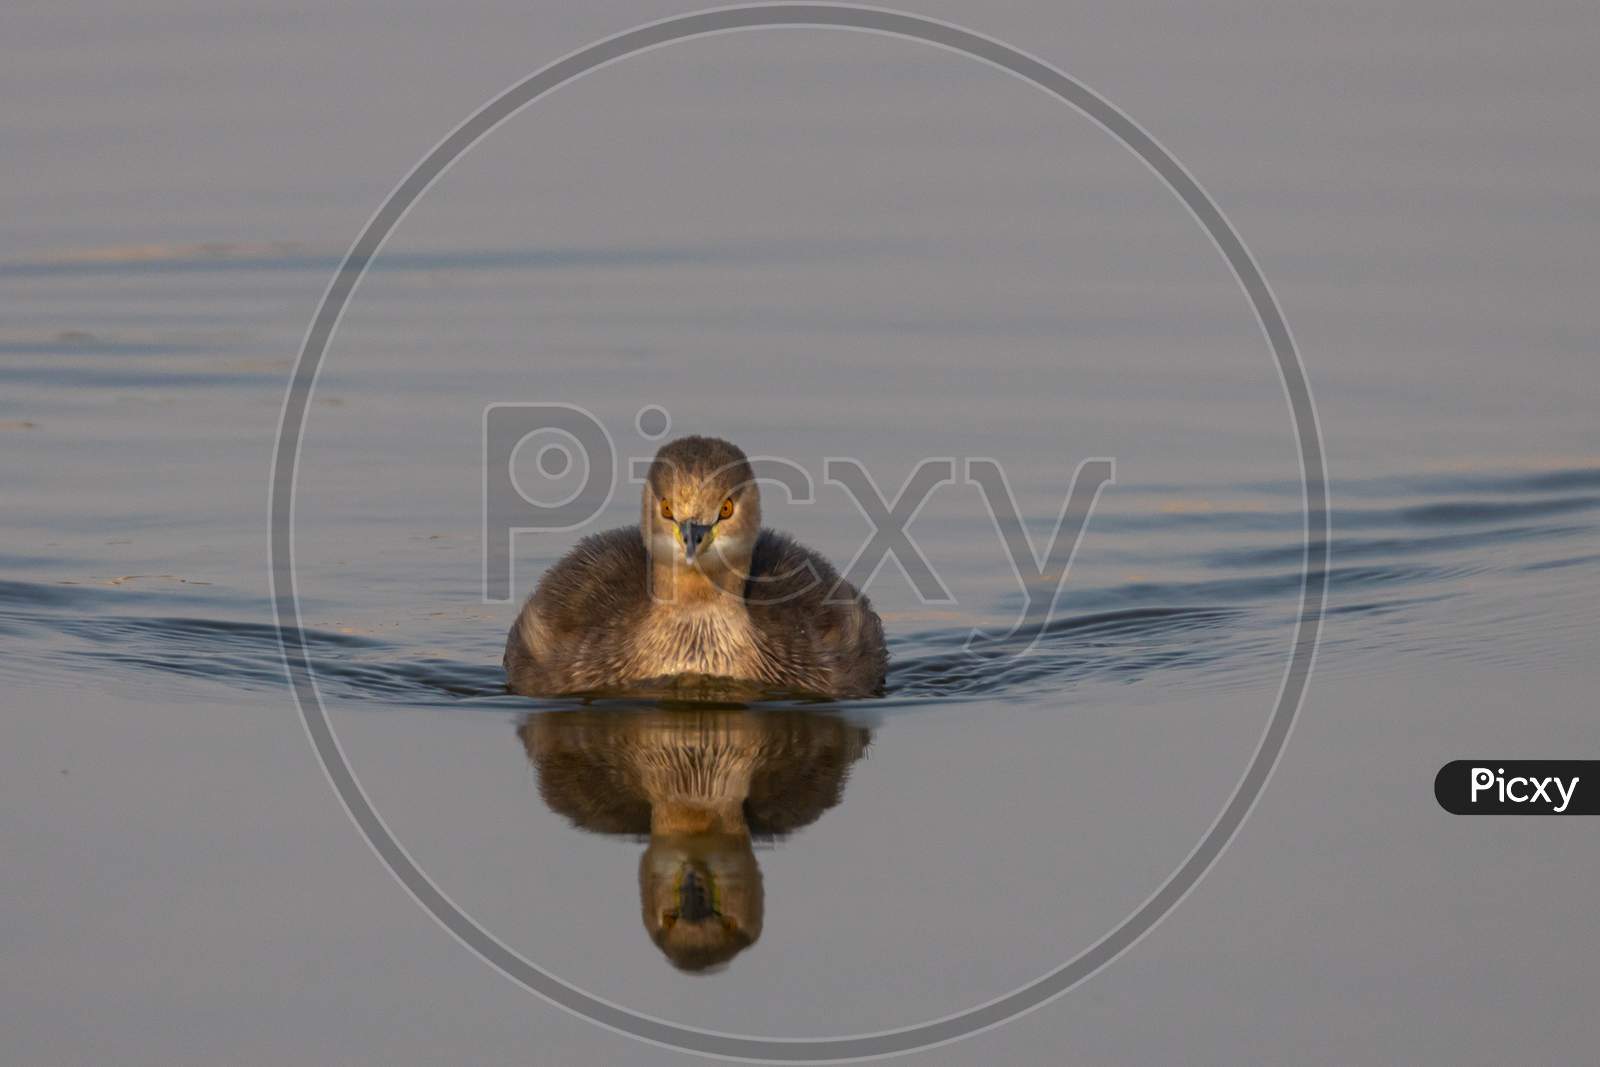 A little Grebe also known as Tachybaptus ruficollis and dabchick